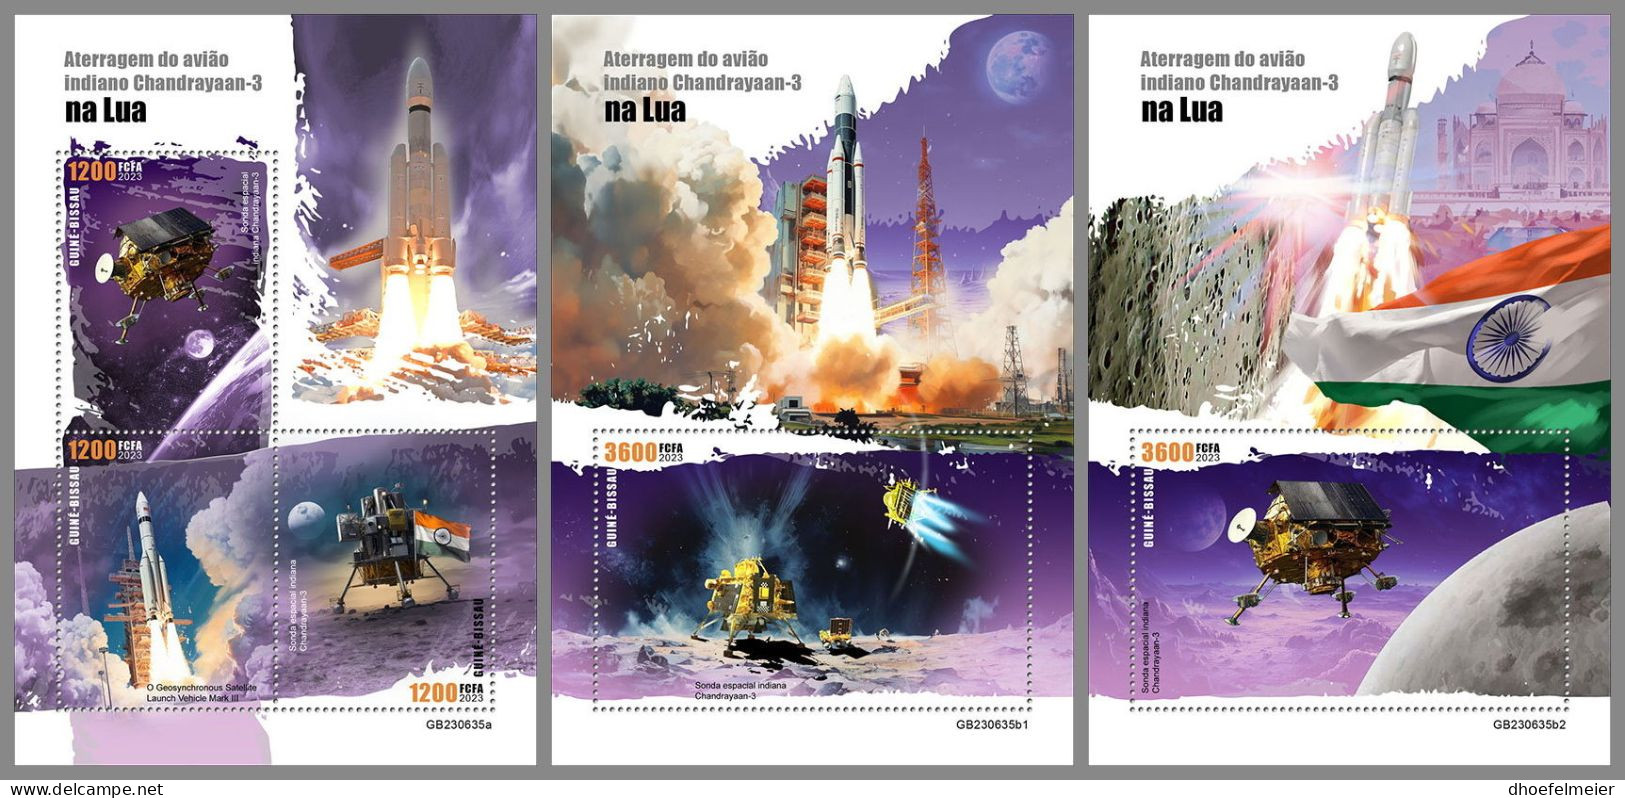 GUINEA-BISSAU 2023 MNH Indian Chandrayaan-3 Space Raumfahrt M/S+2S/S – IMPERFORATED – DHQ2420 - Afrique